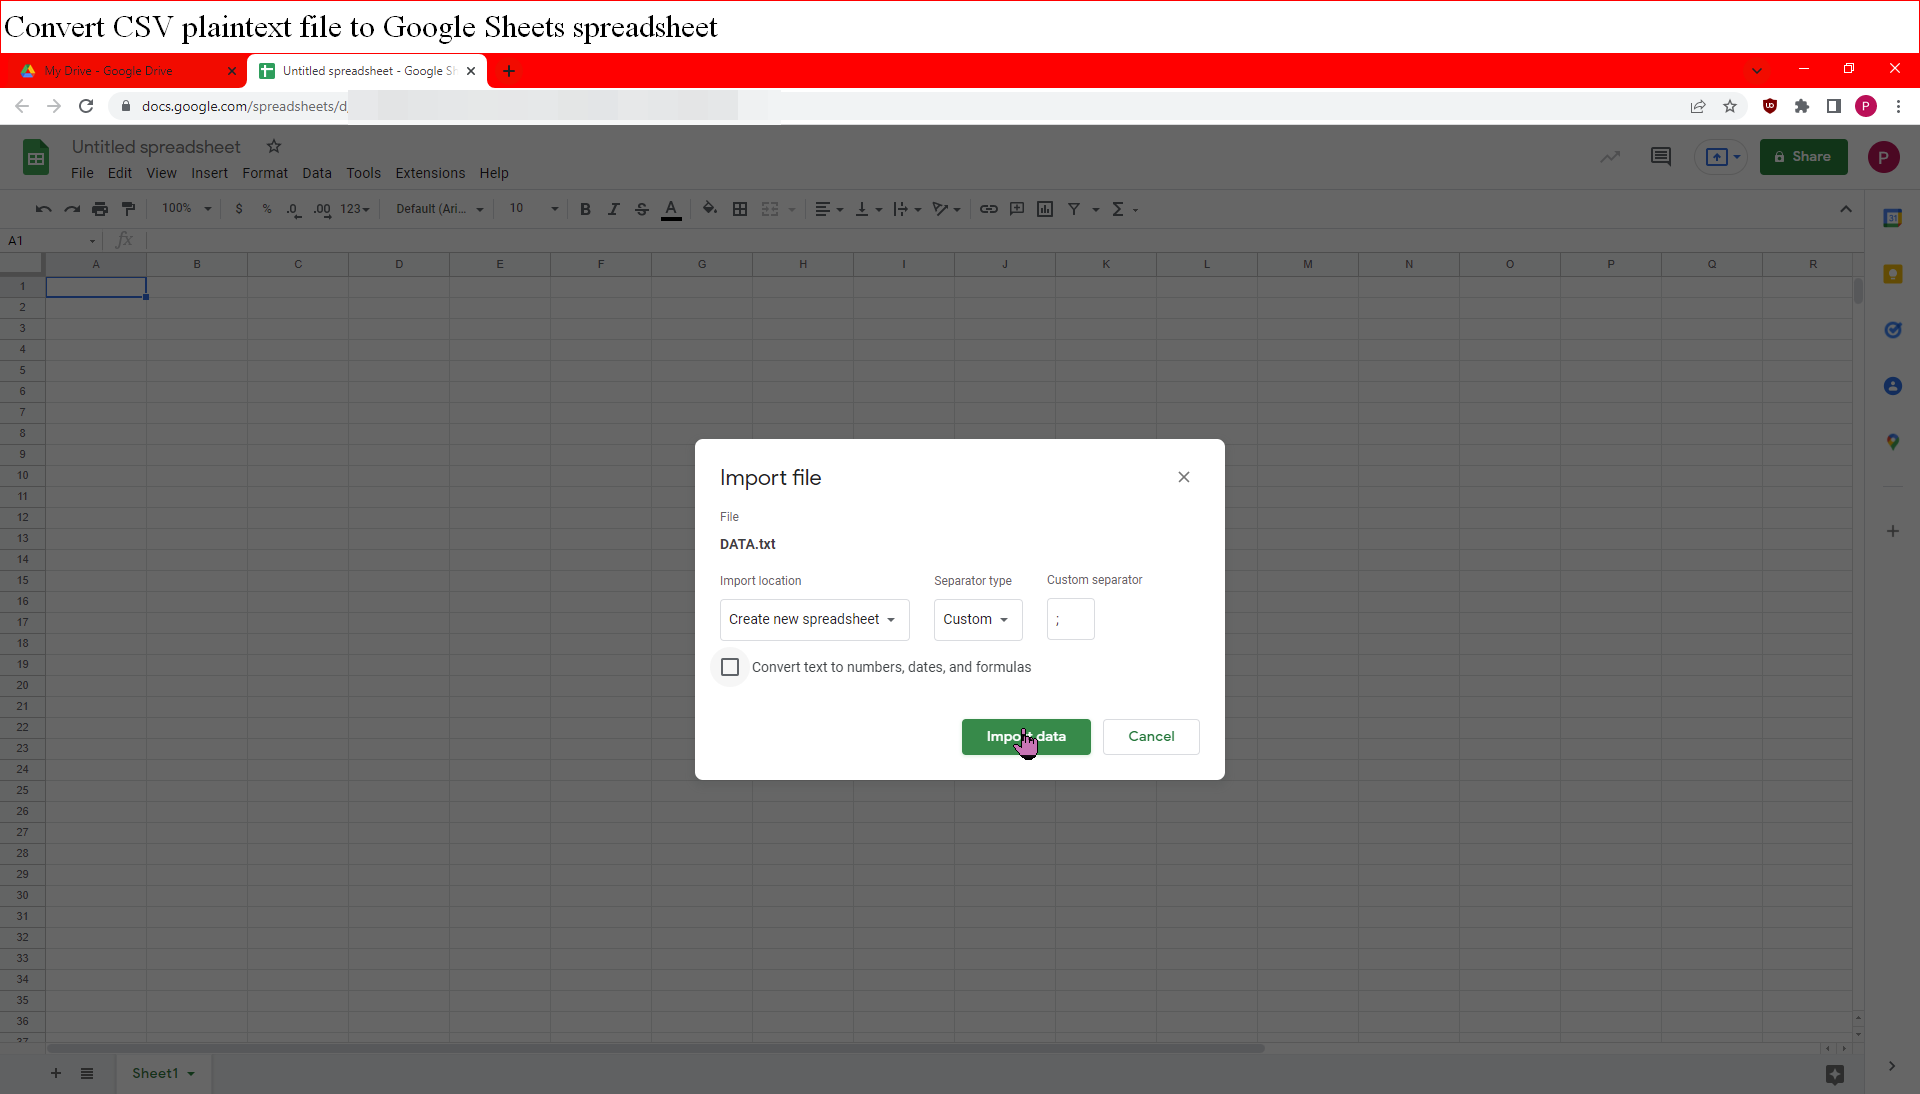 Importing the CSV file in Google Sheets